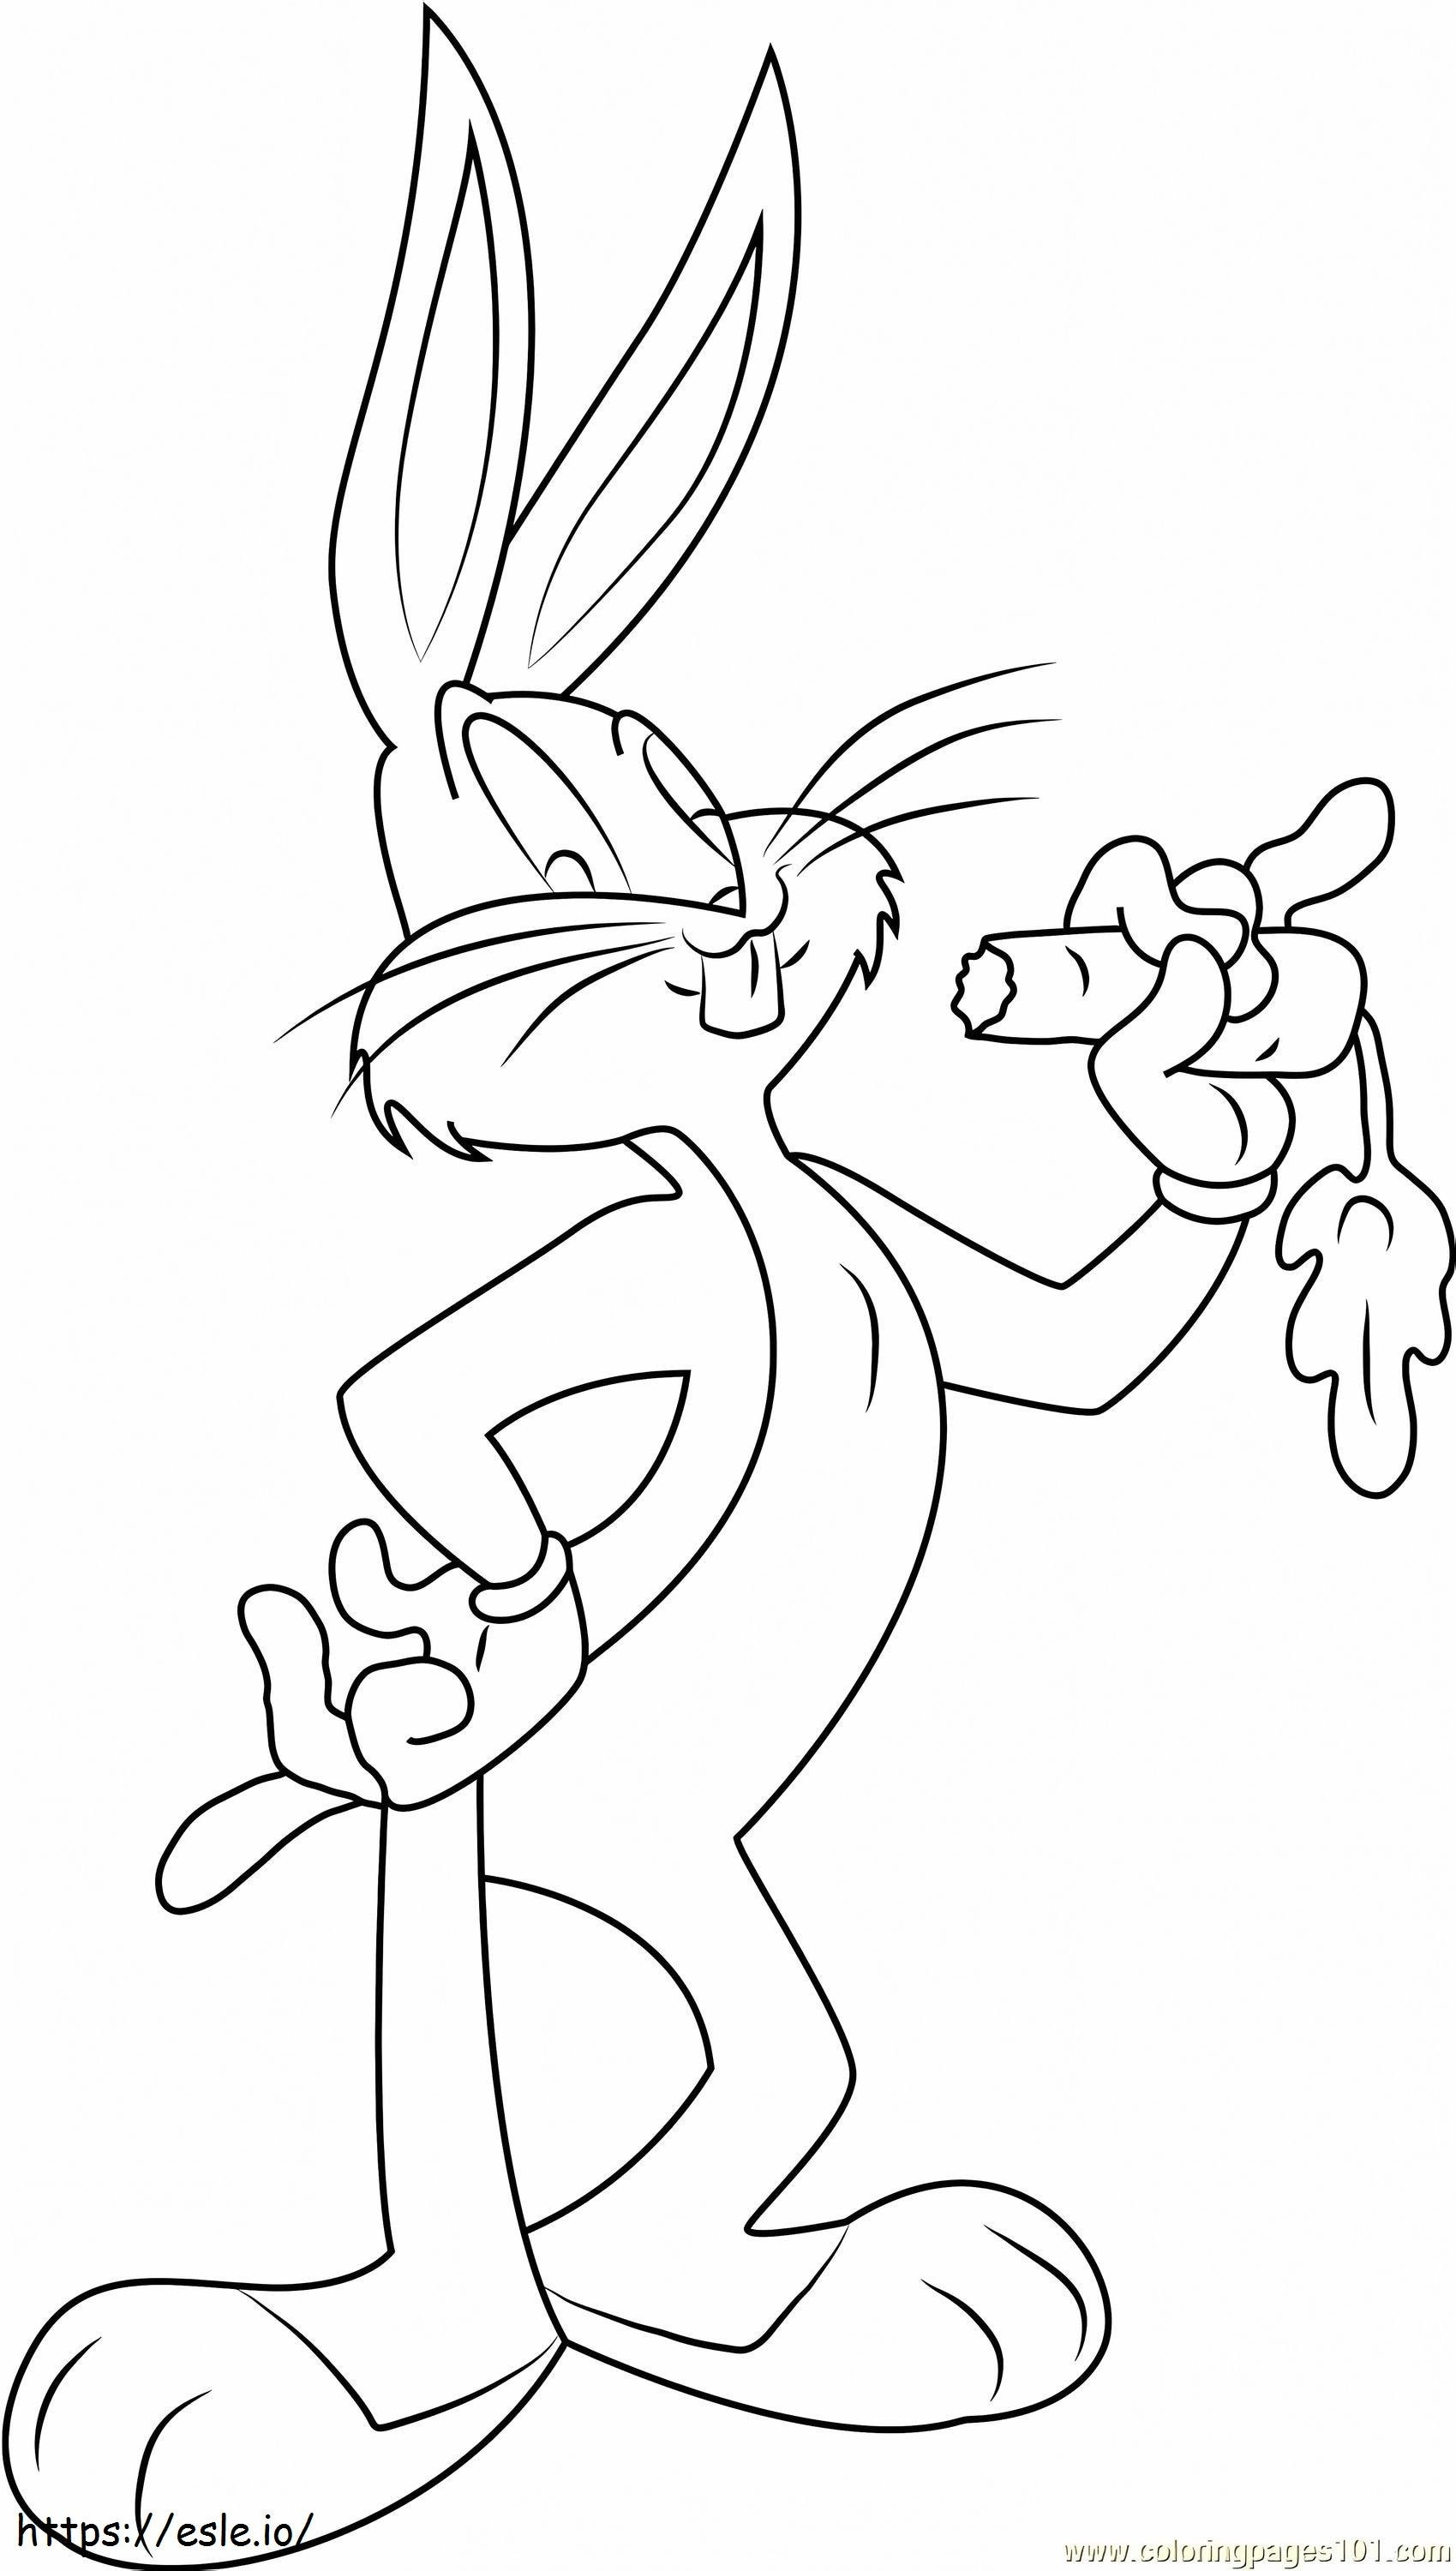 Bugs Bunny Eating Carrot1 coloring page